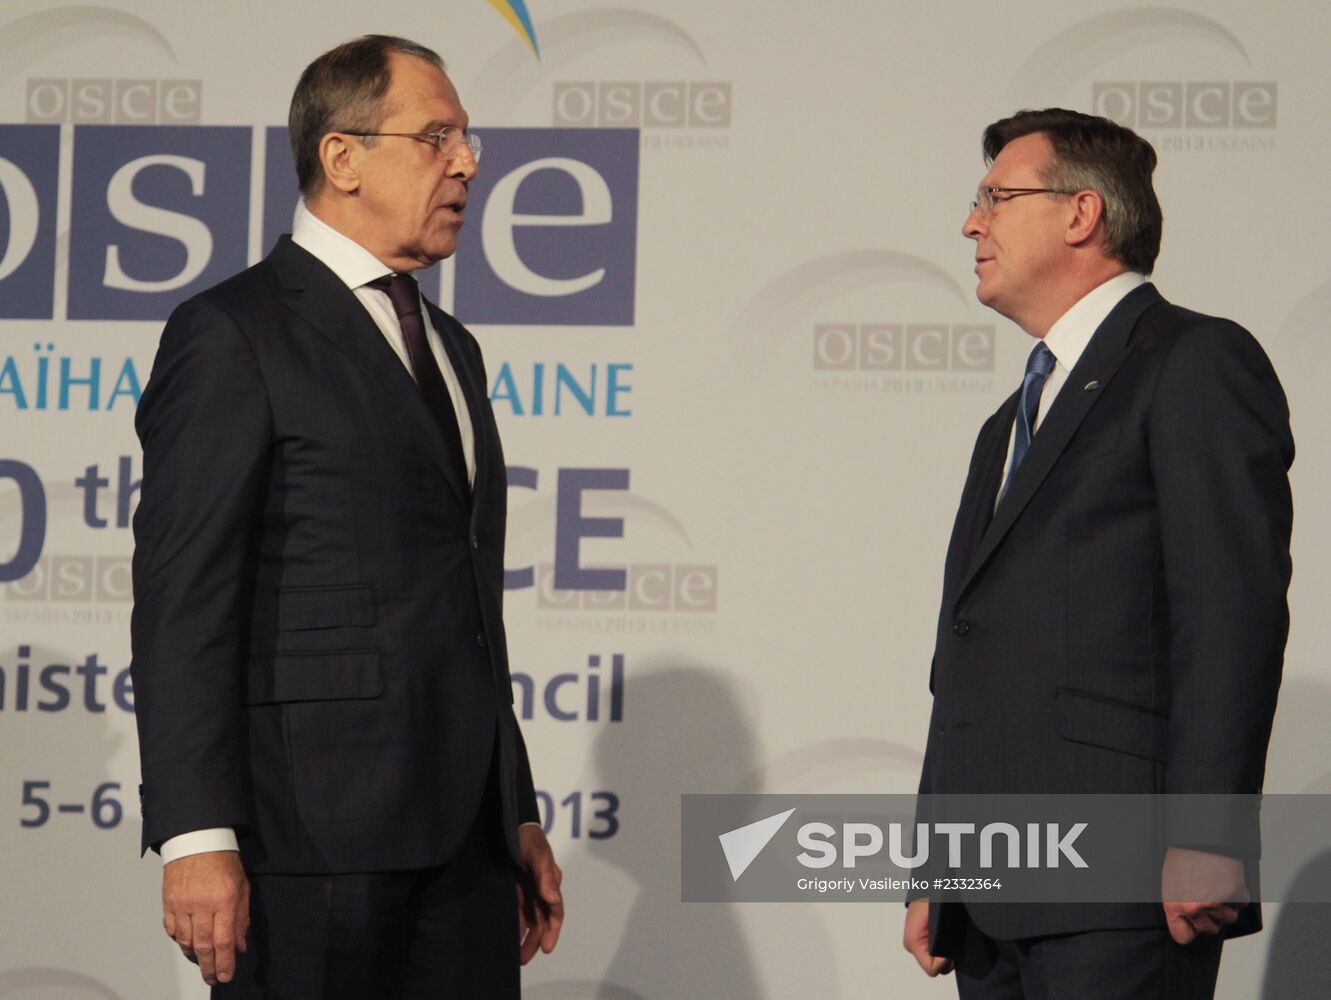 Meeting of Council of OSCE Foreign Ministers in Kiev